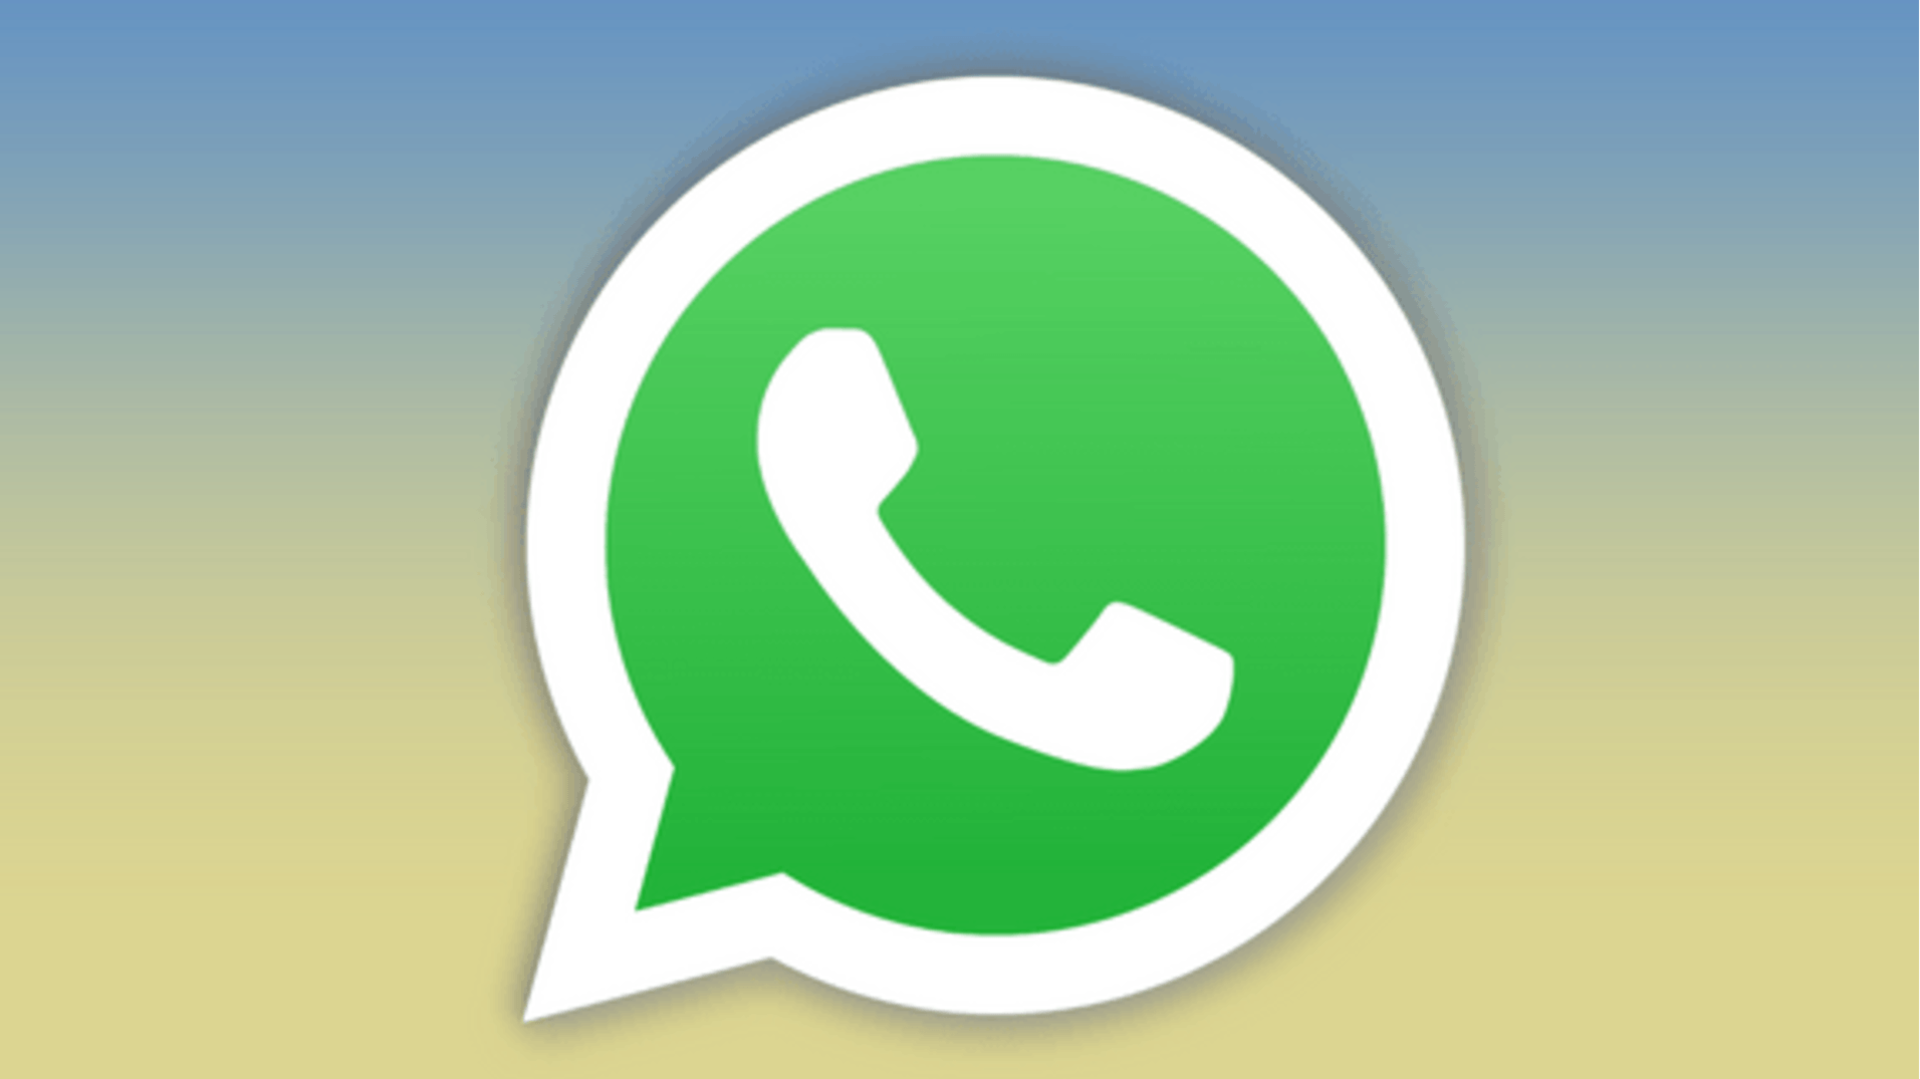 Upcoming WhatsApp features: Edit messages, silence unknown calls, and more